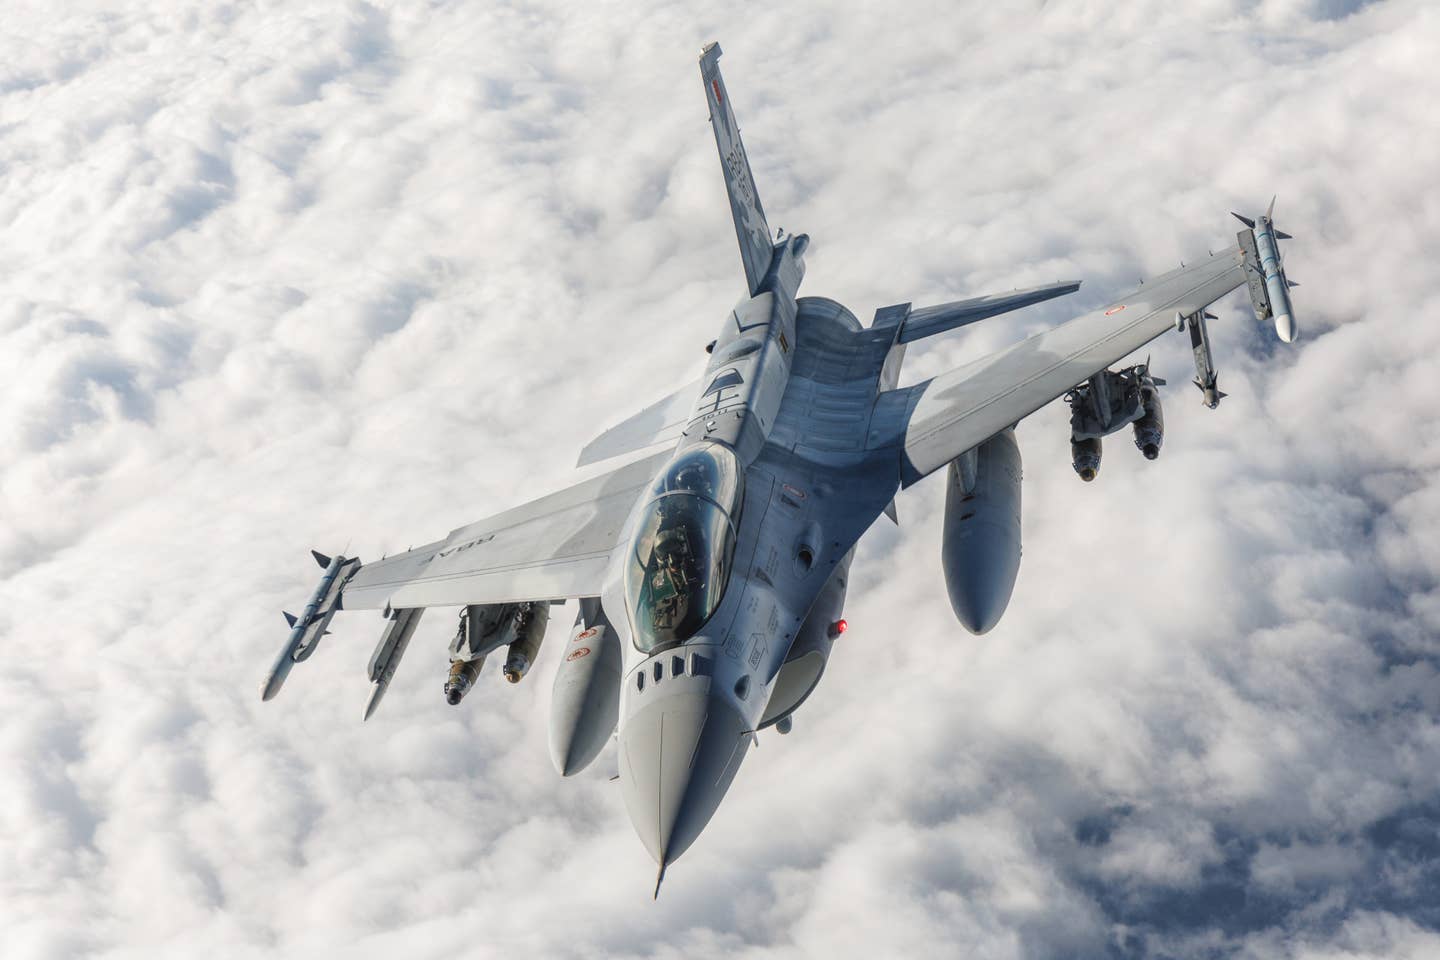 A Bahraini Block 70 F-16D flown by members of the 416th Flight Test Squadron pulls away after receiving fuel from a KC-135 tanker with a crew from the 370th Flight Test Squadron during a<em> </em>sortie out of Edwards Air Force Base in California on March 7, 2024. <em>USAF</em>